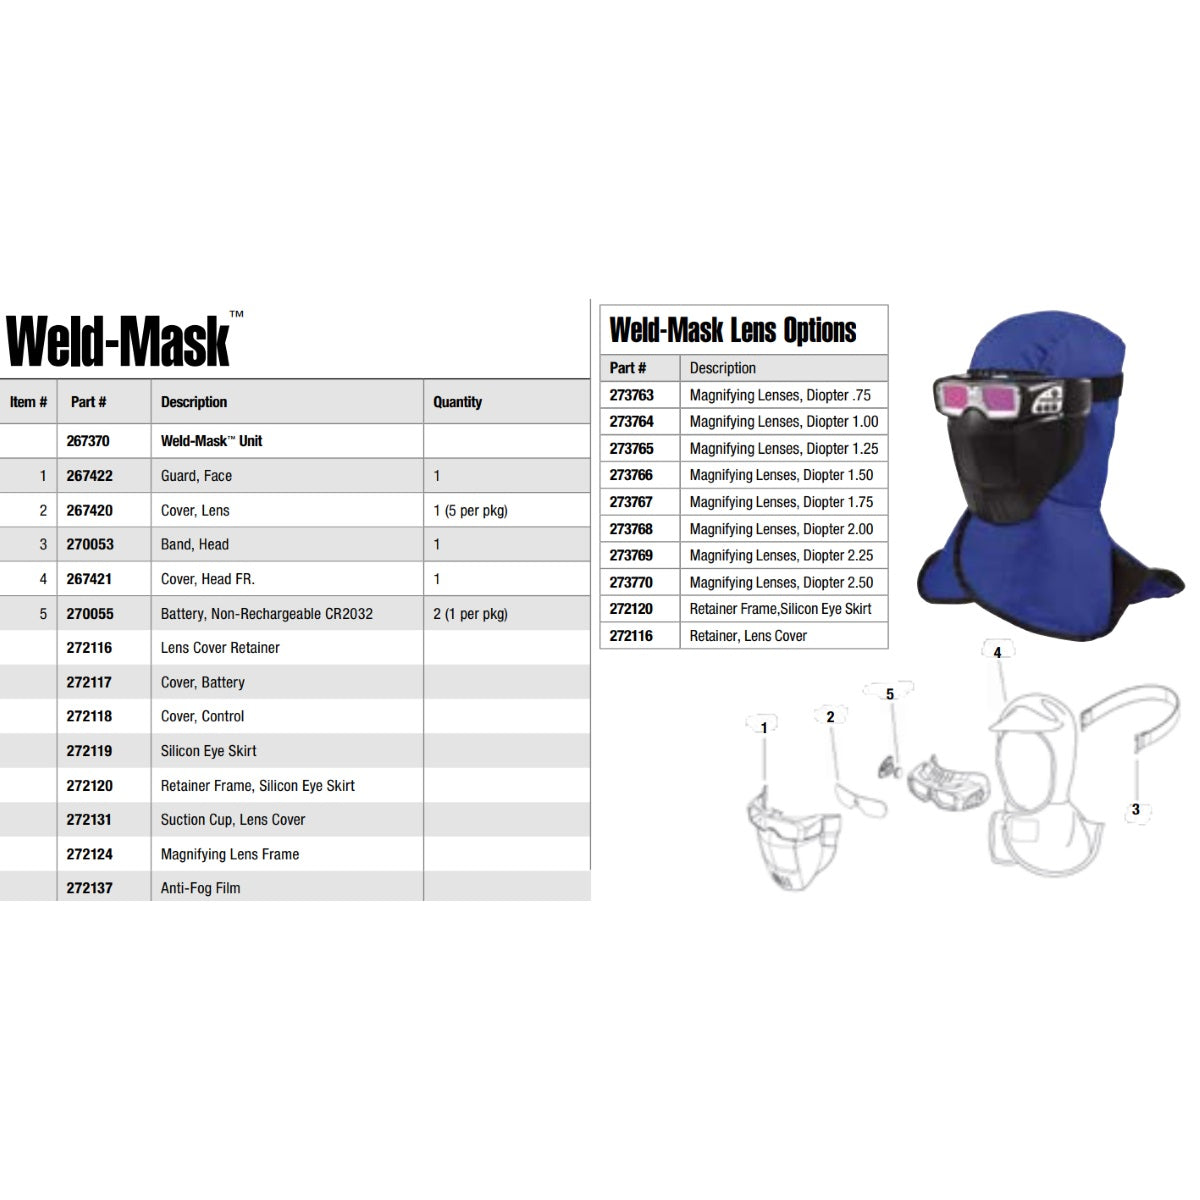 Miller Weld-Mask Replacement Face Guard (267422)